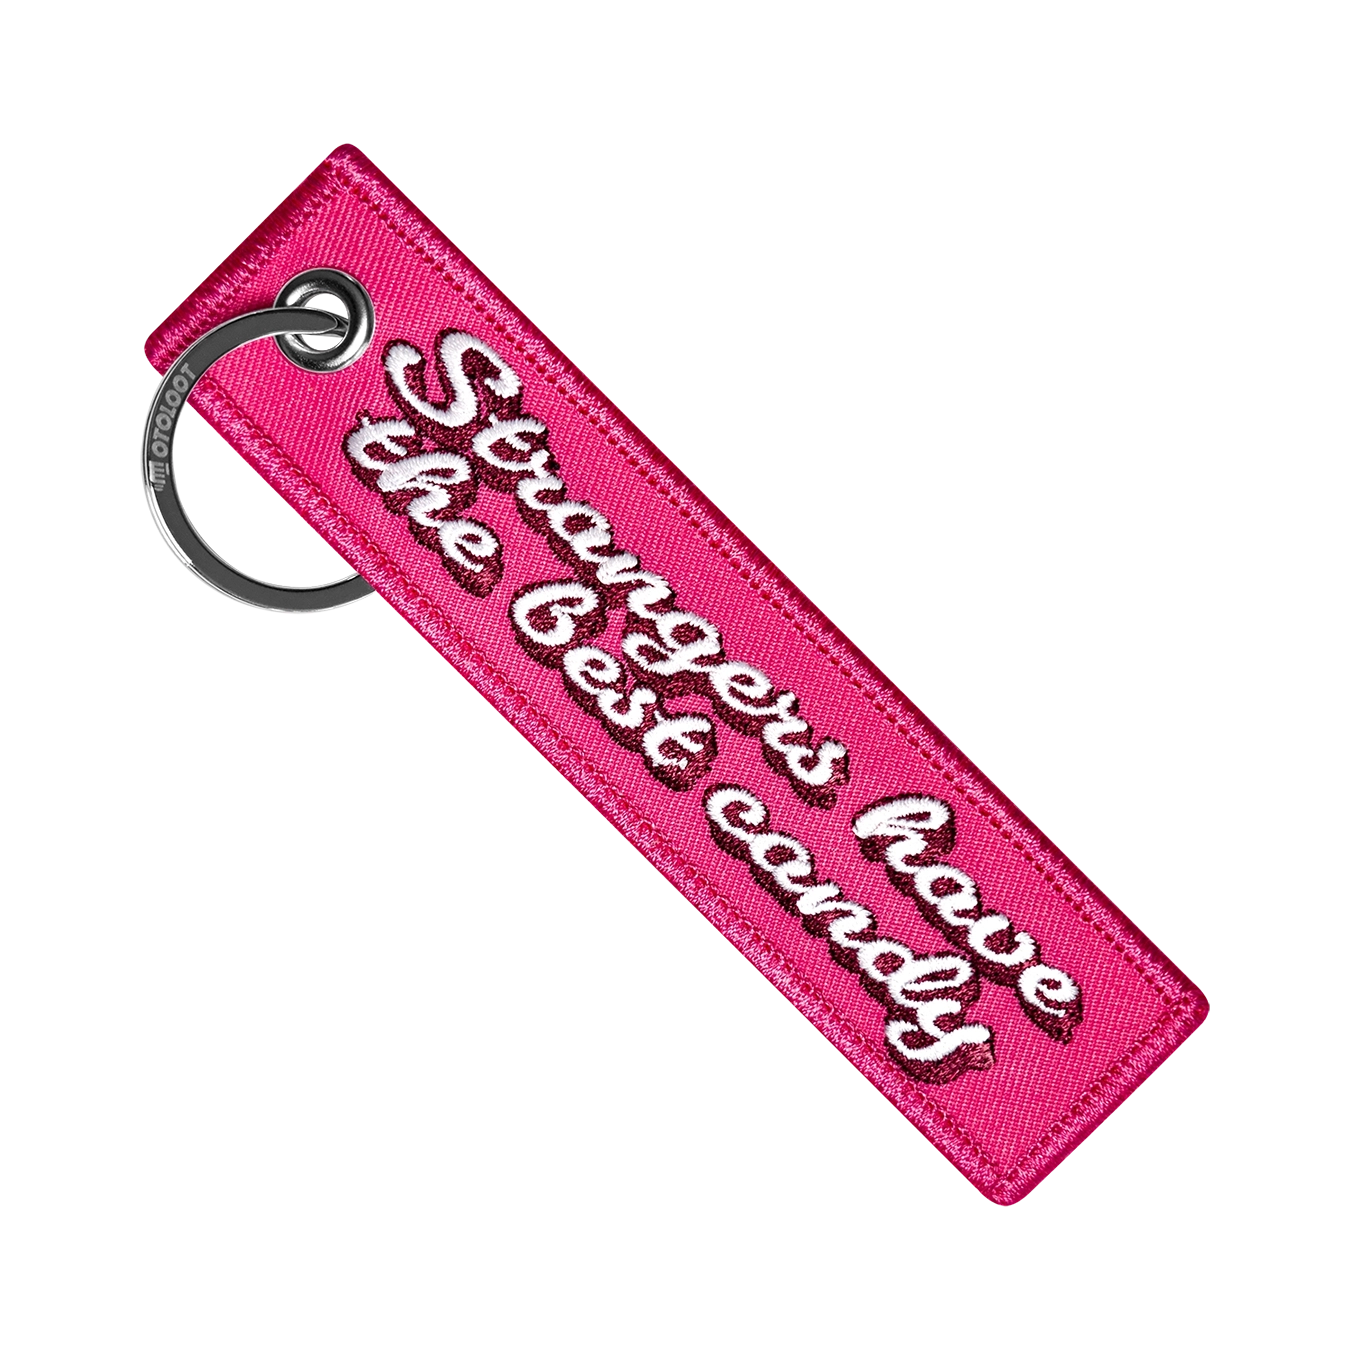 Strangers Have The Best Candy - Motorcycle Keychain